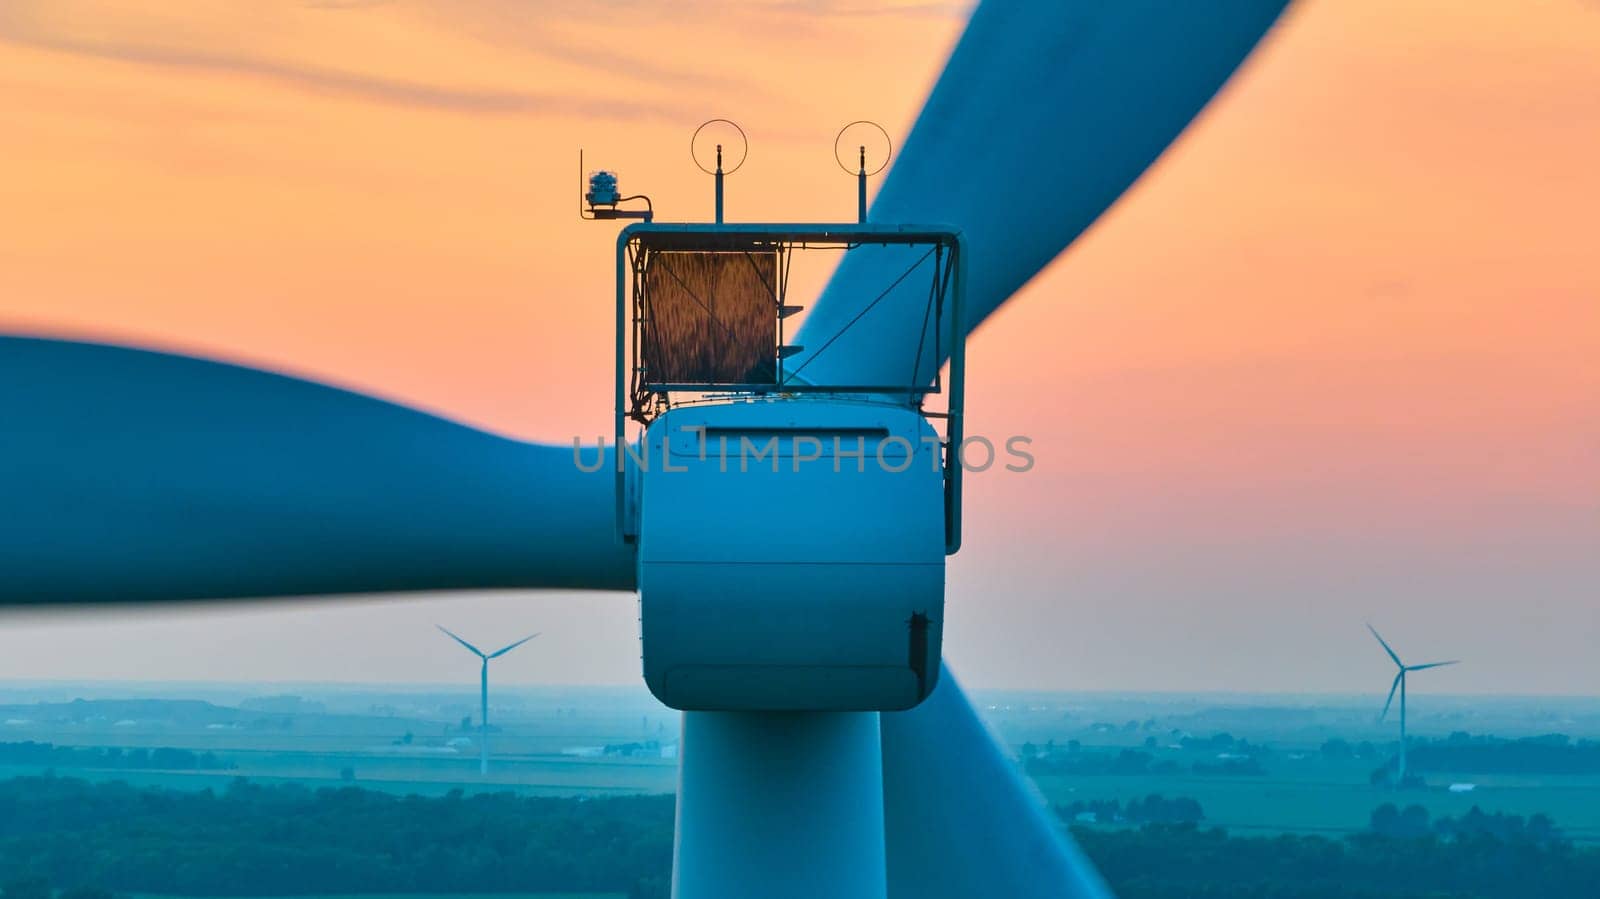 Close up of motor on wind turbine with orange sunset aerial of wind farm by njproductions